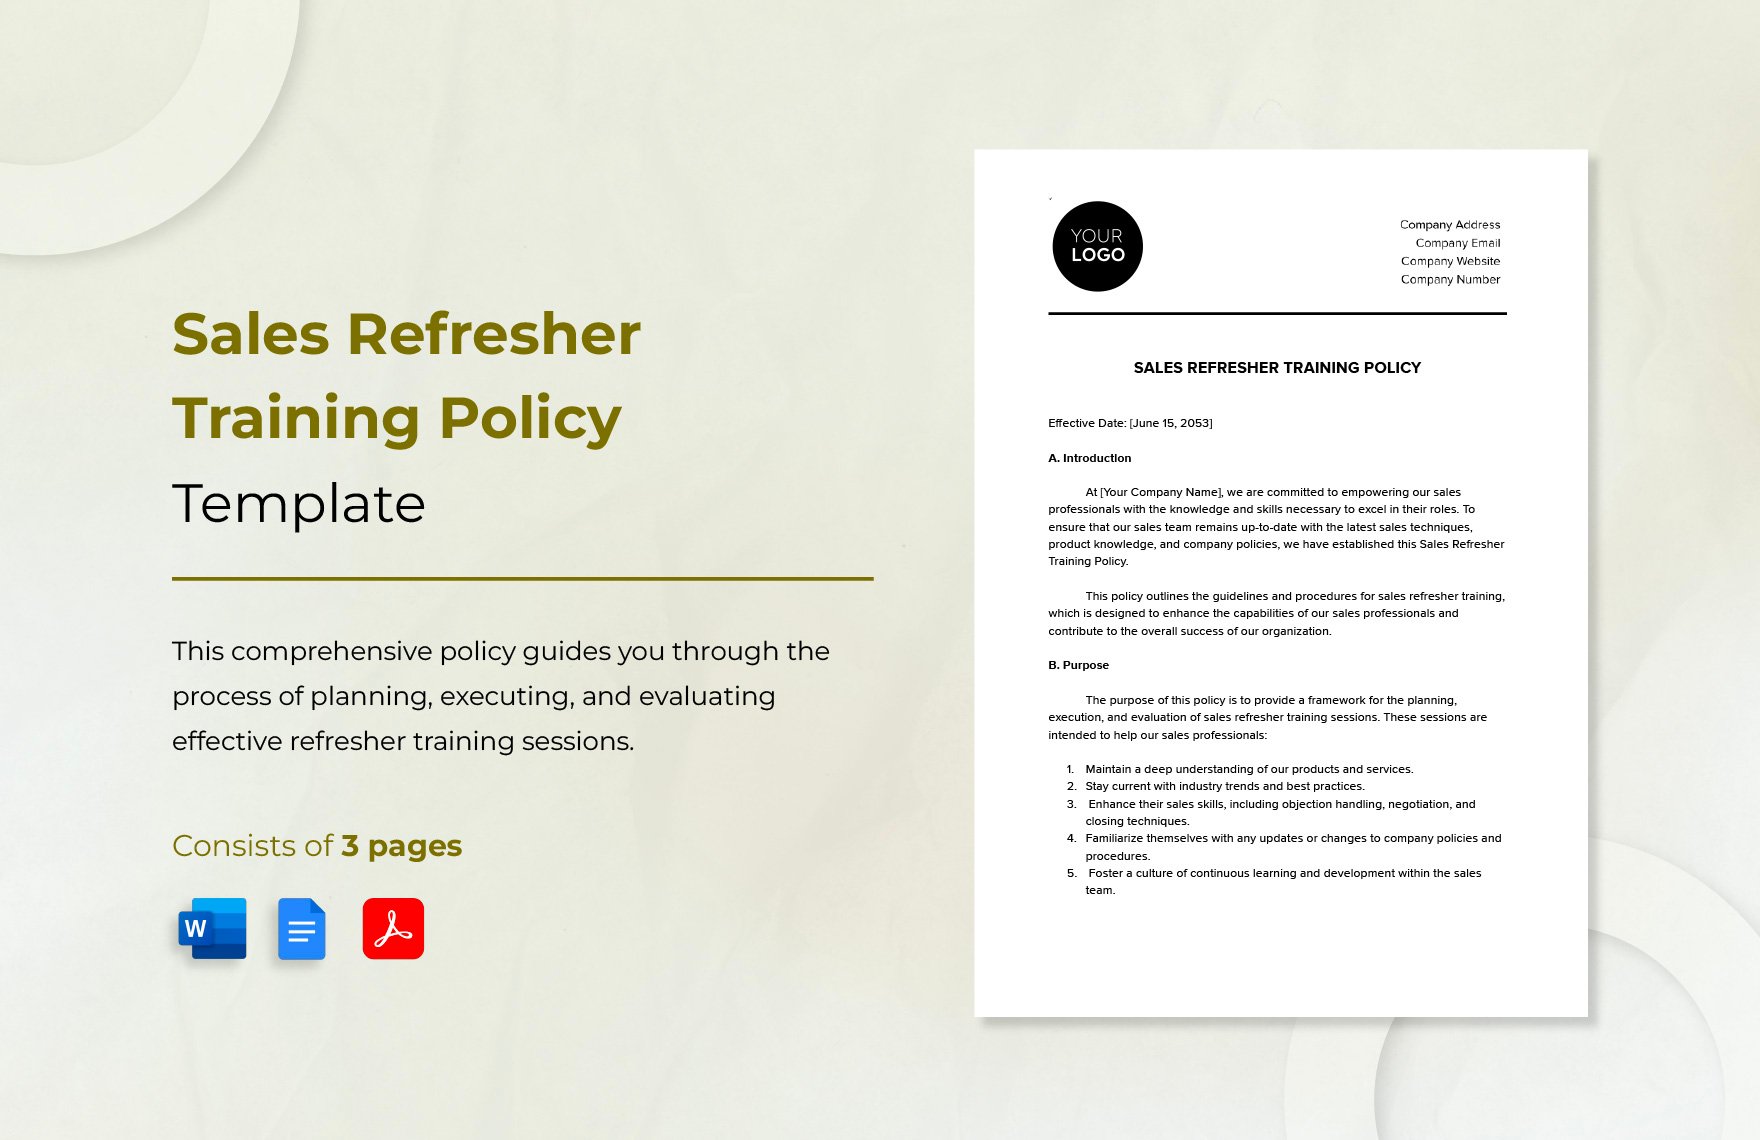 Sales Refresher Training Policy Template